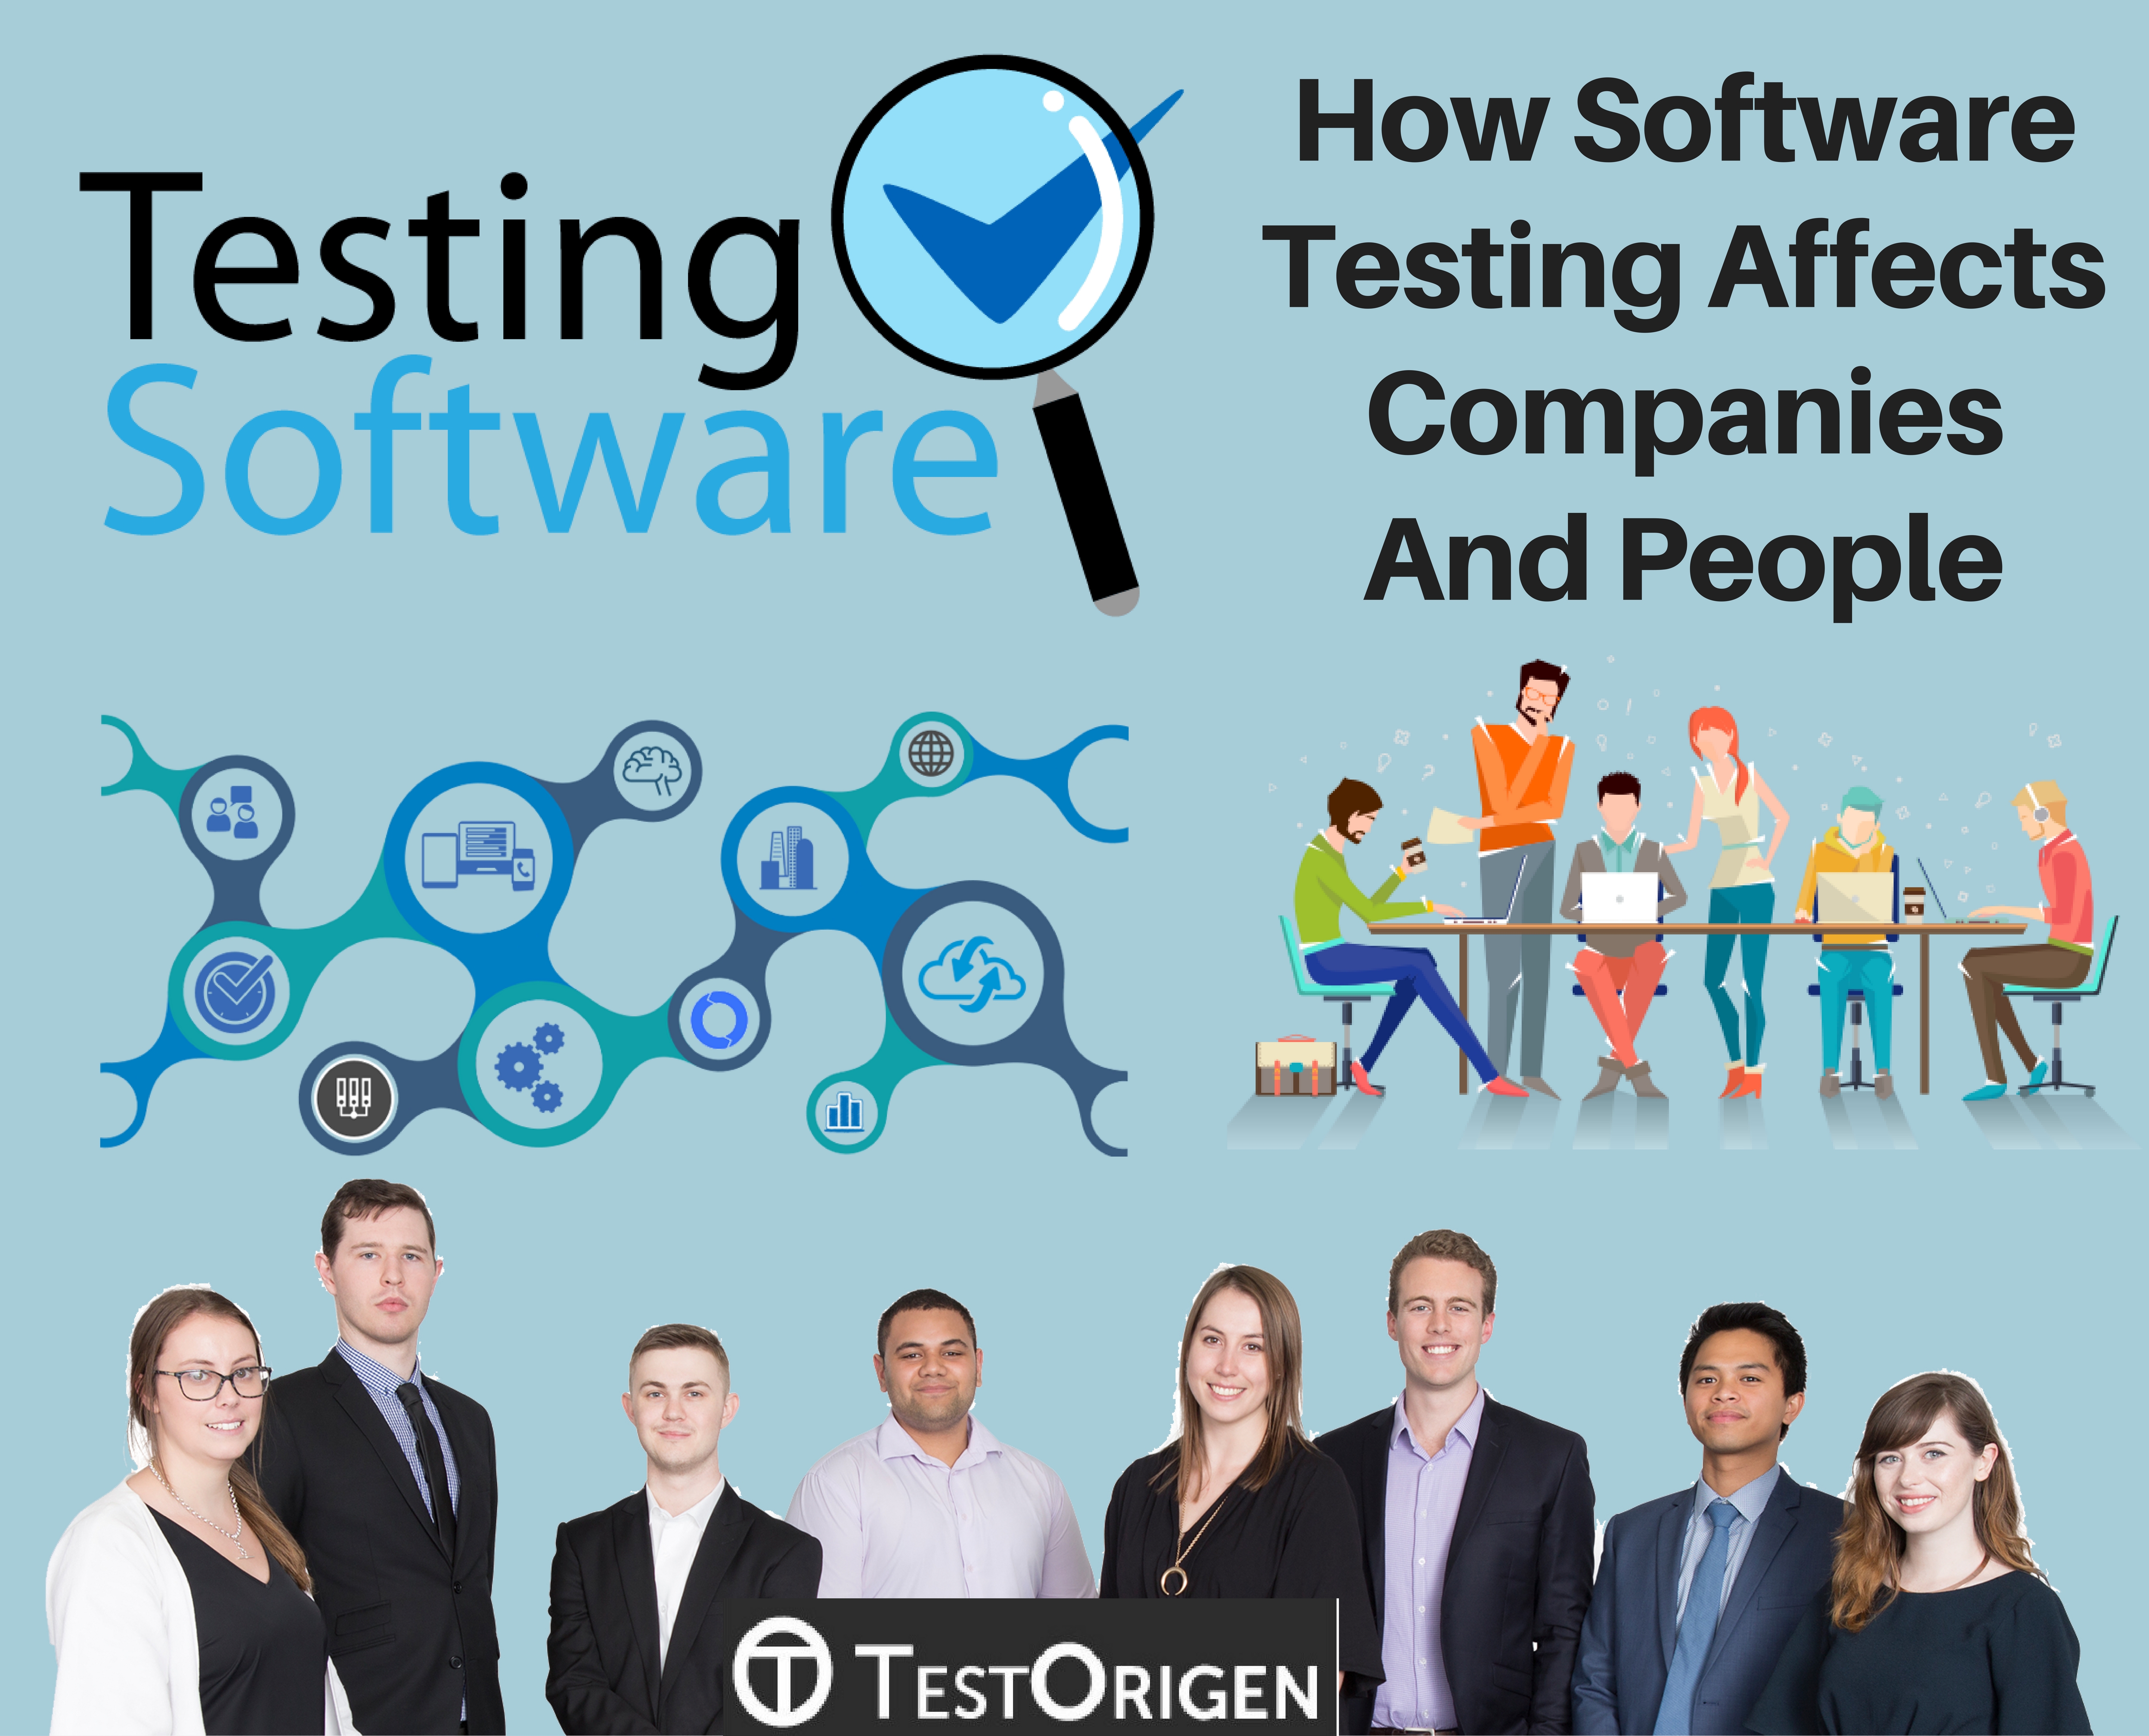 How Software Testing Affects Companies And People